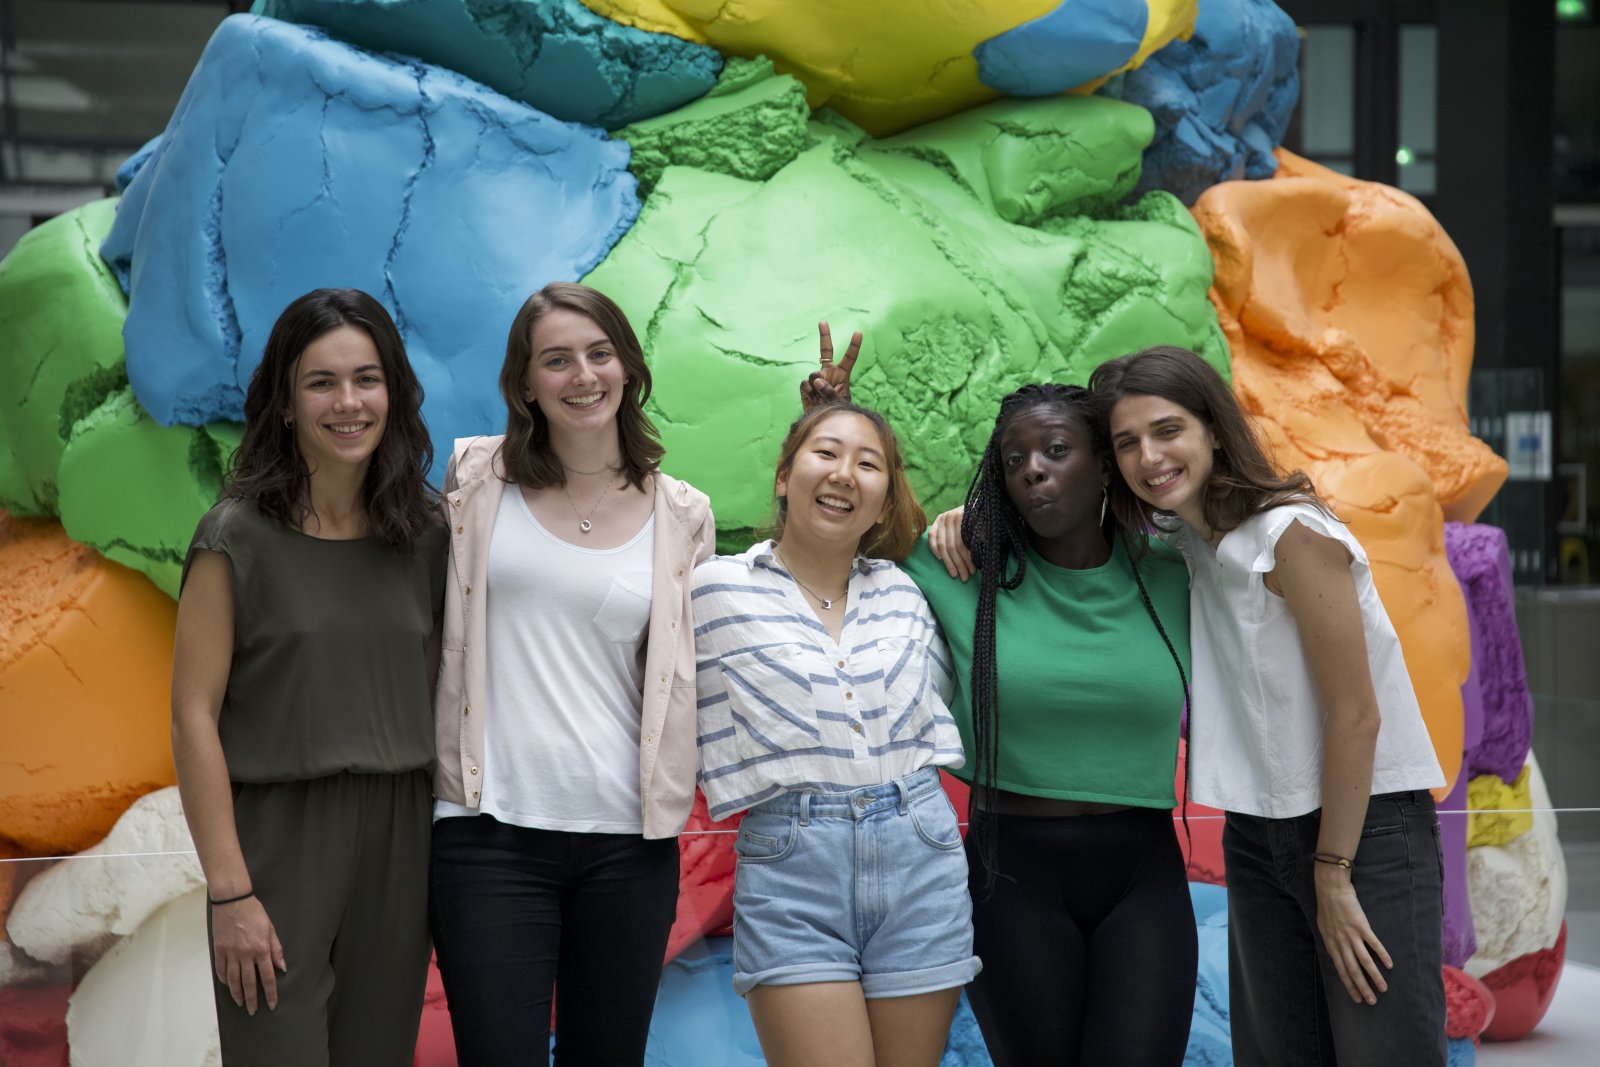 Some members of our international team at Station F (Konexio’s headquarters): Marianne (French), Tarin (American), Yu Jeong (South Korean), Binta (American) and Valeria (Italian). Photo taken by our team photographer/videographer, Maria (Colombia), July 2018.